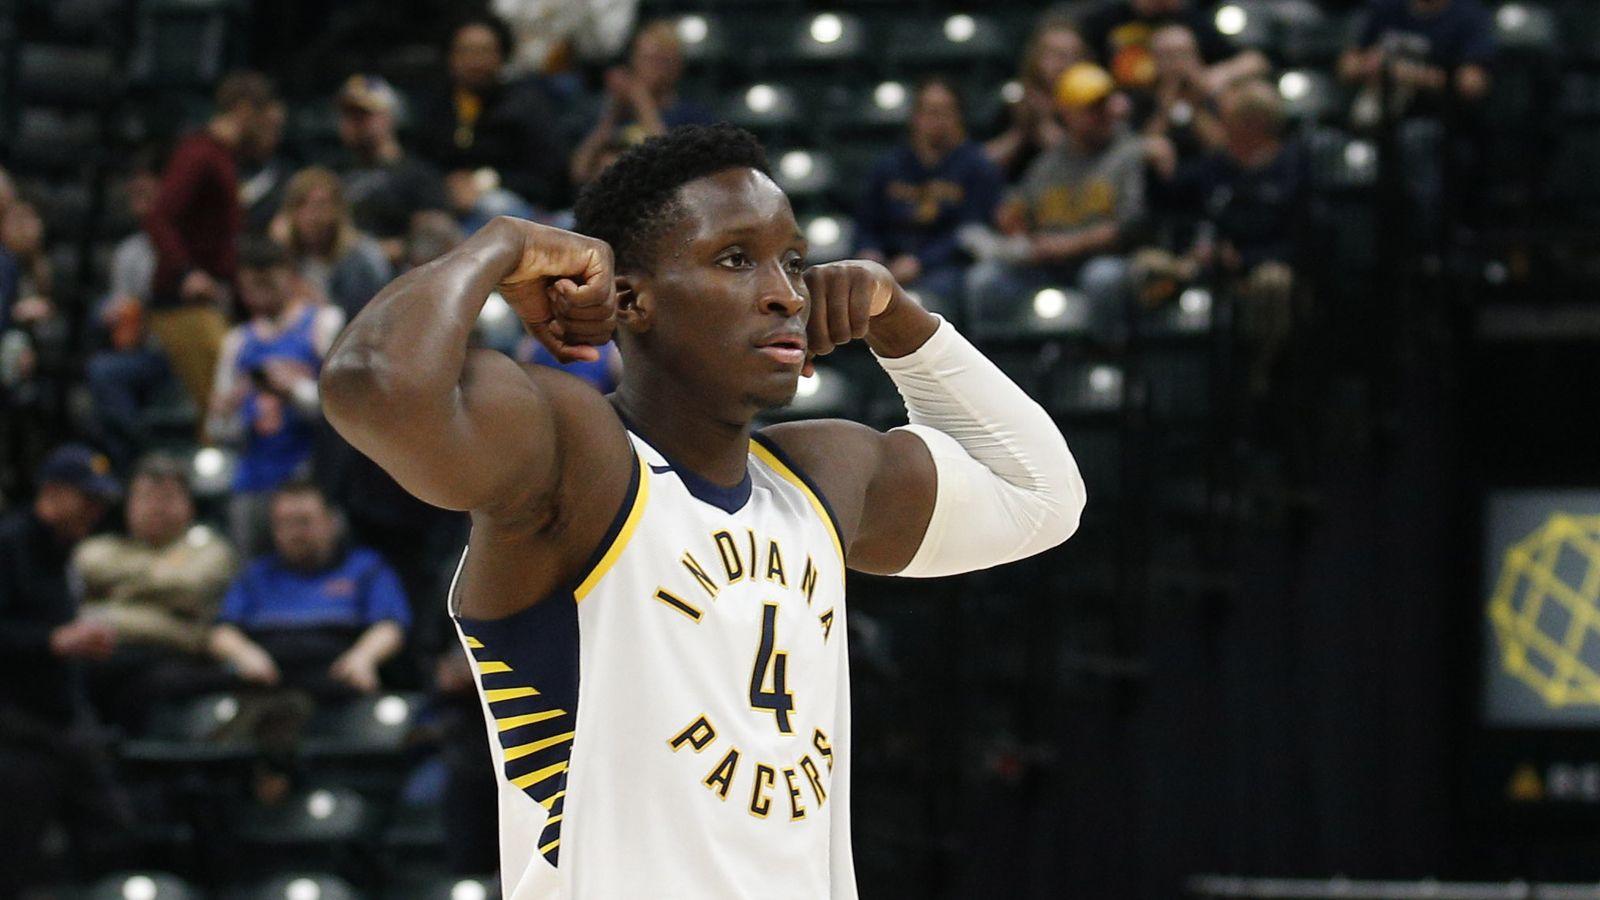 WATCH: Victor Oladipo Does 10 Push Ups To Begin Interview